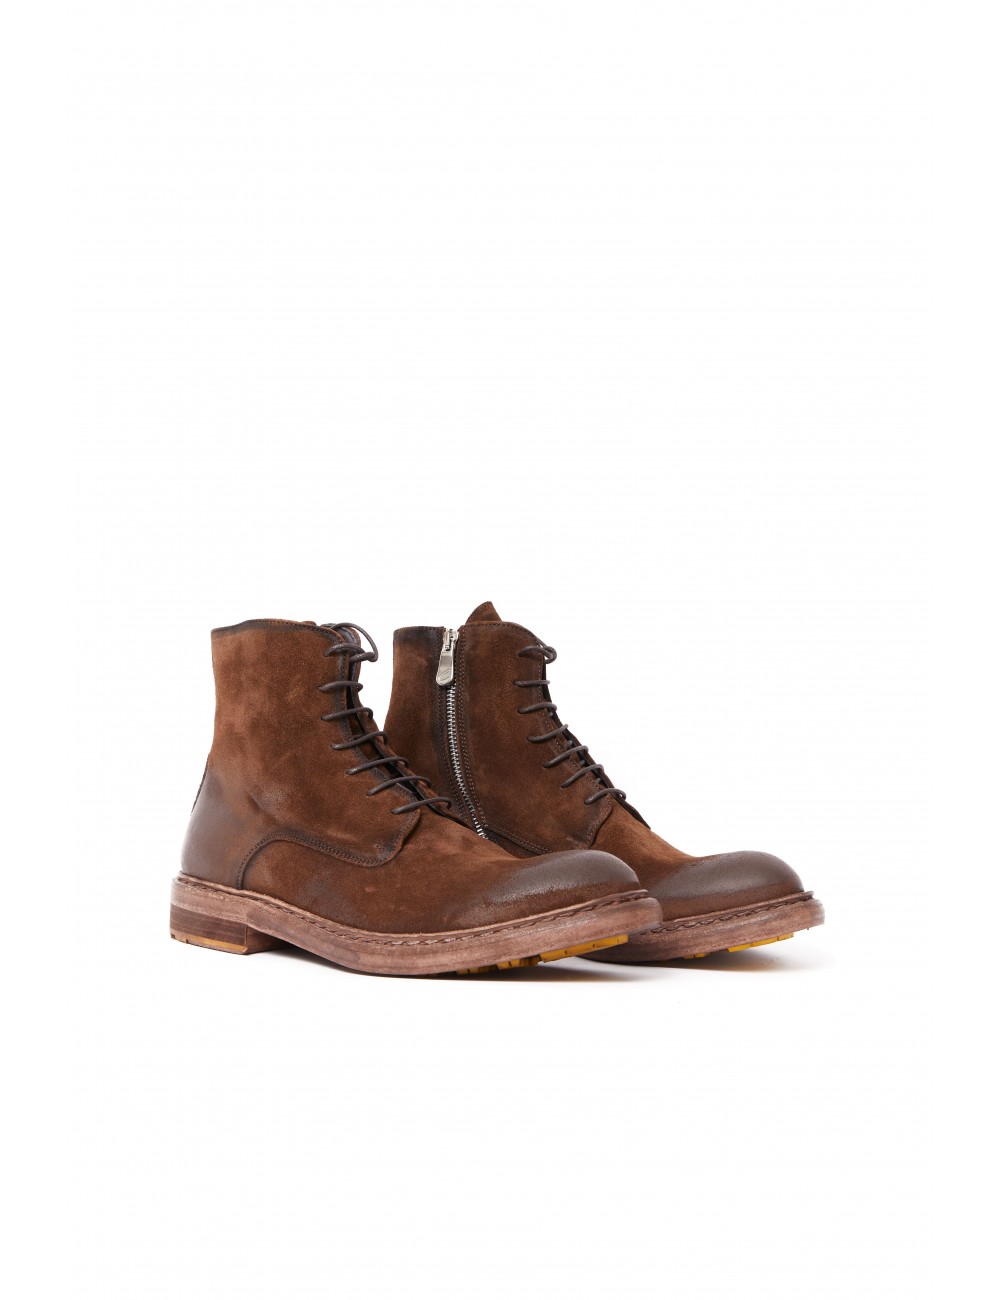 Men's ankle boot in brown...